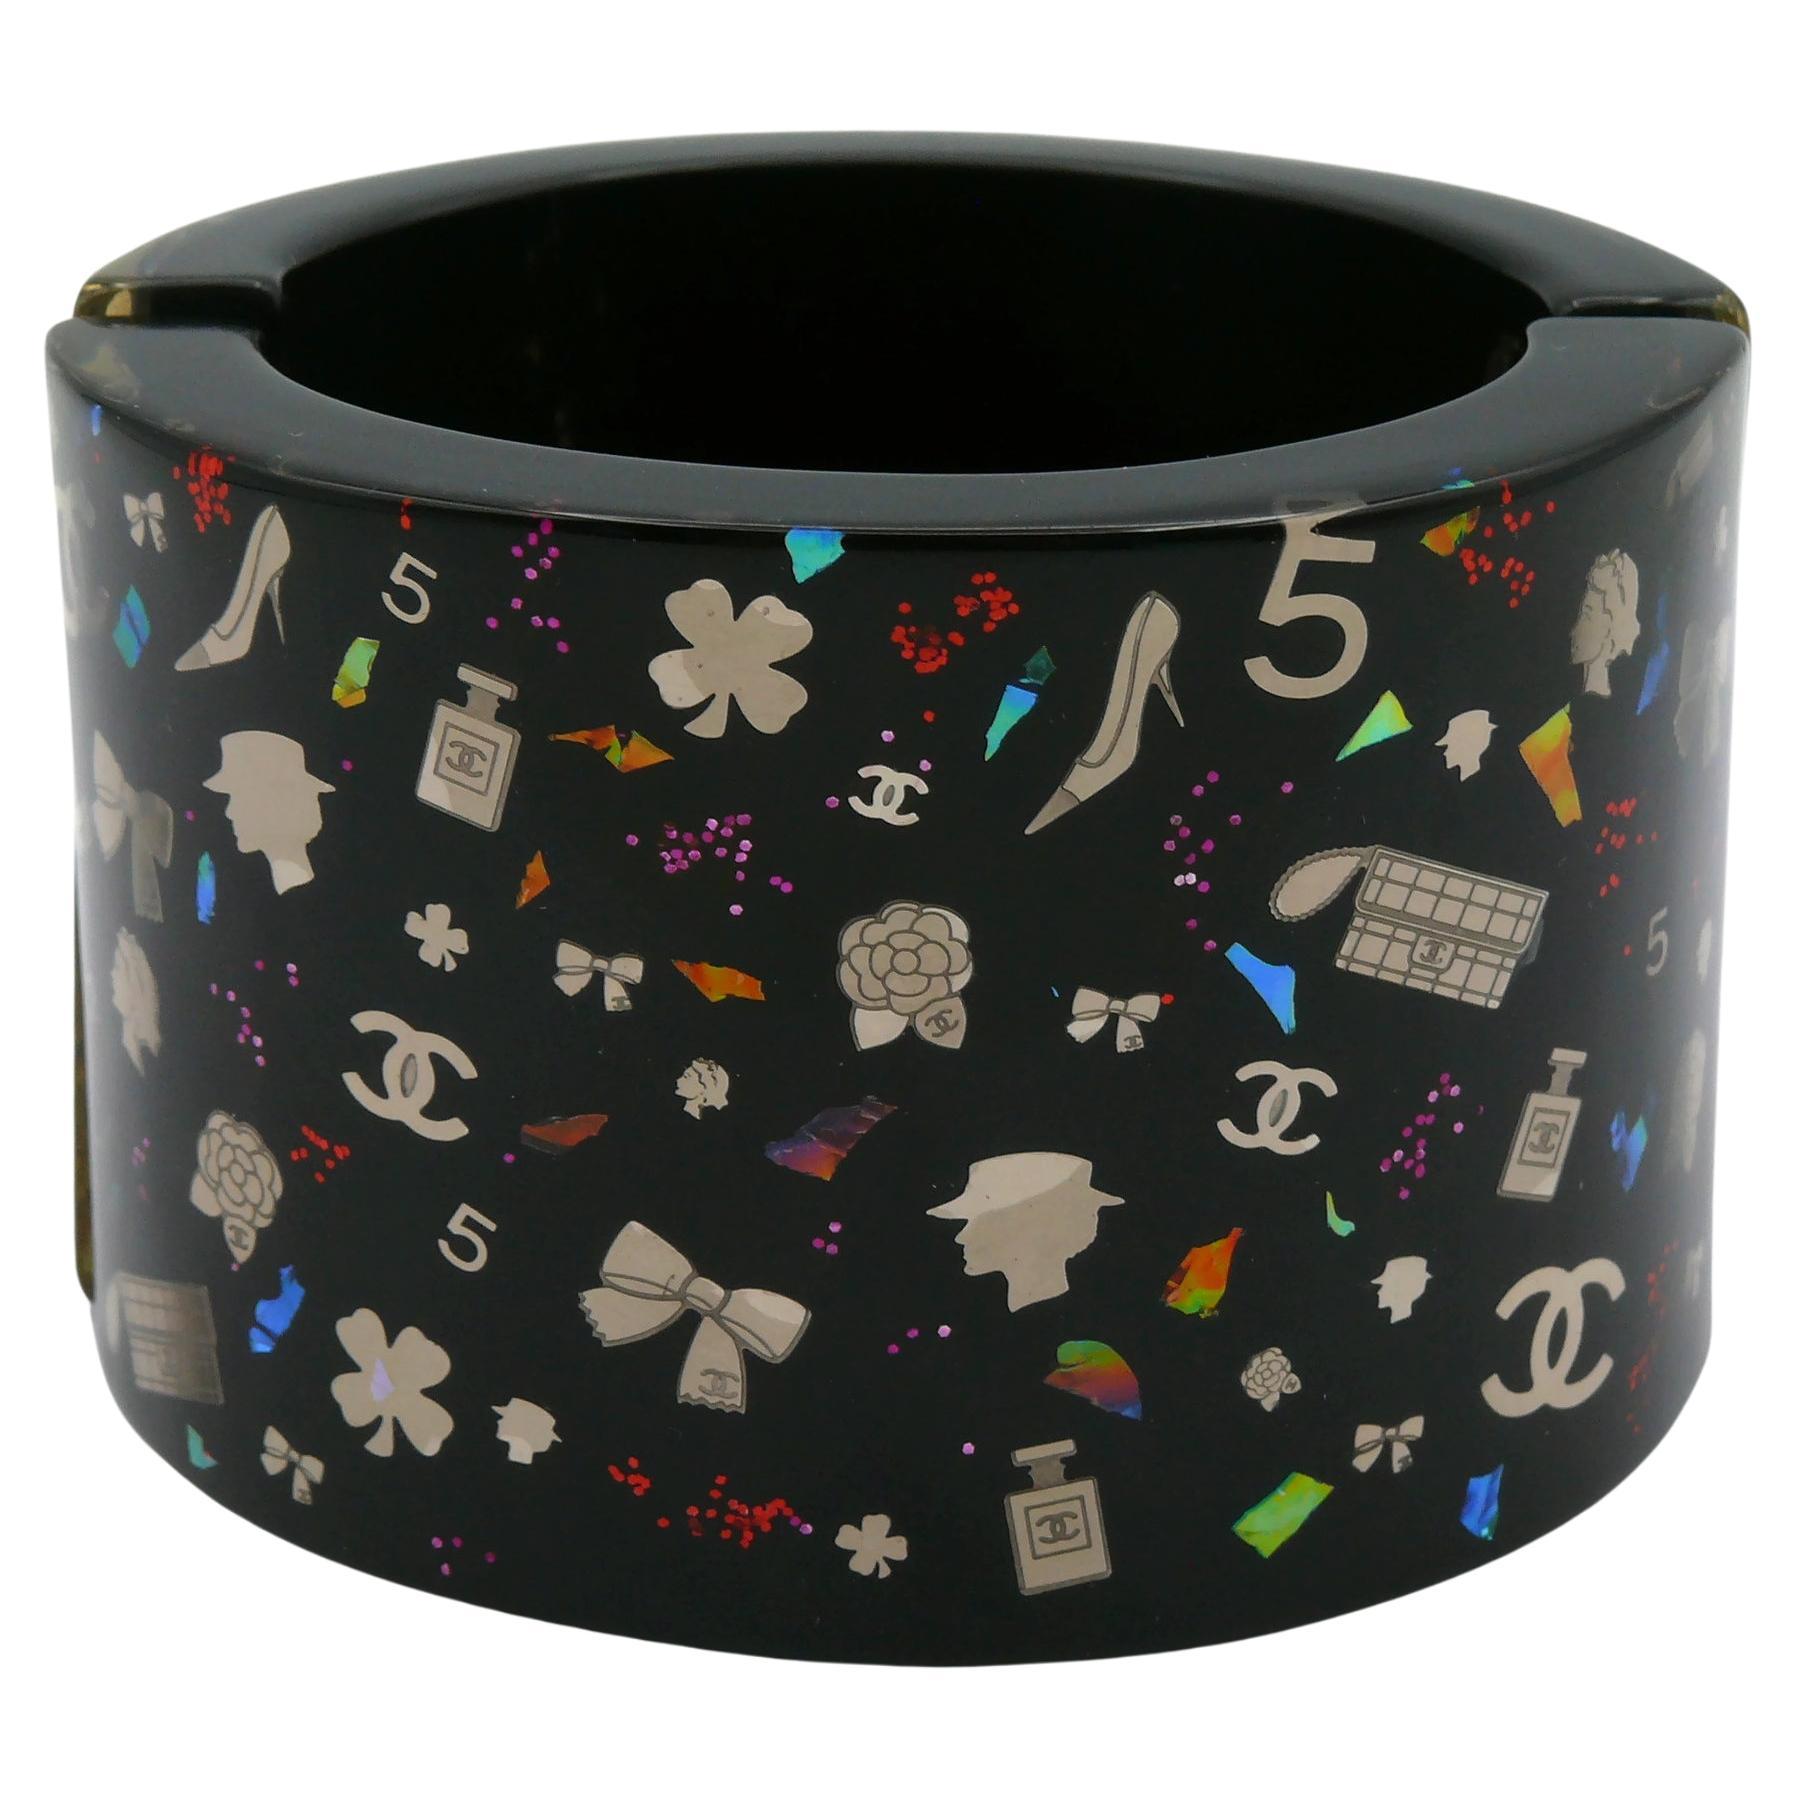 CHANEL by KARL LAGERFELD Iconic Symbols Black Cuff Bracelet, Fall 2006 For Sale